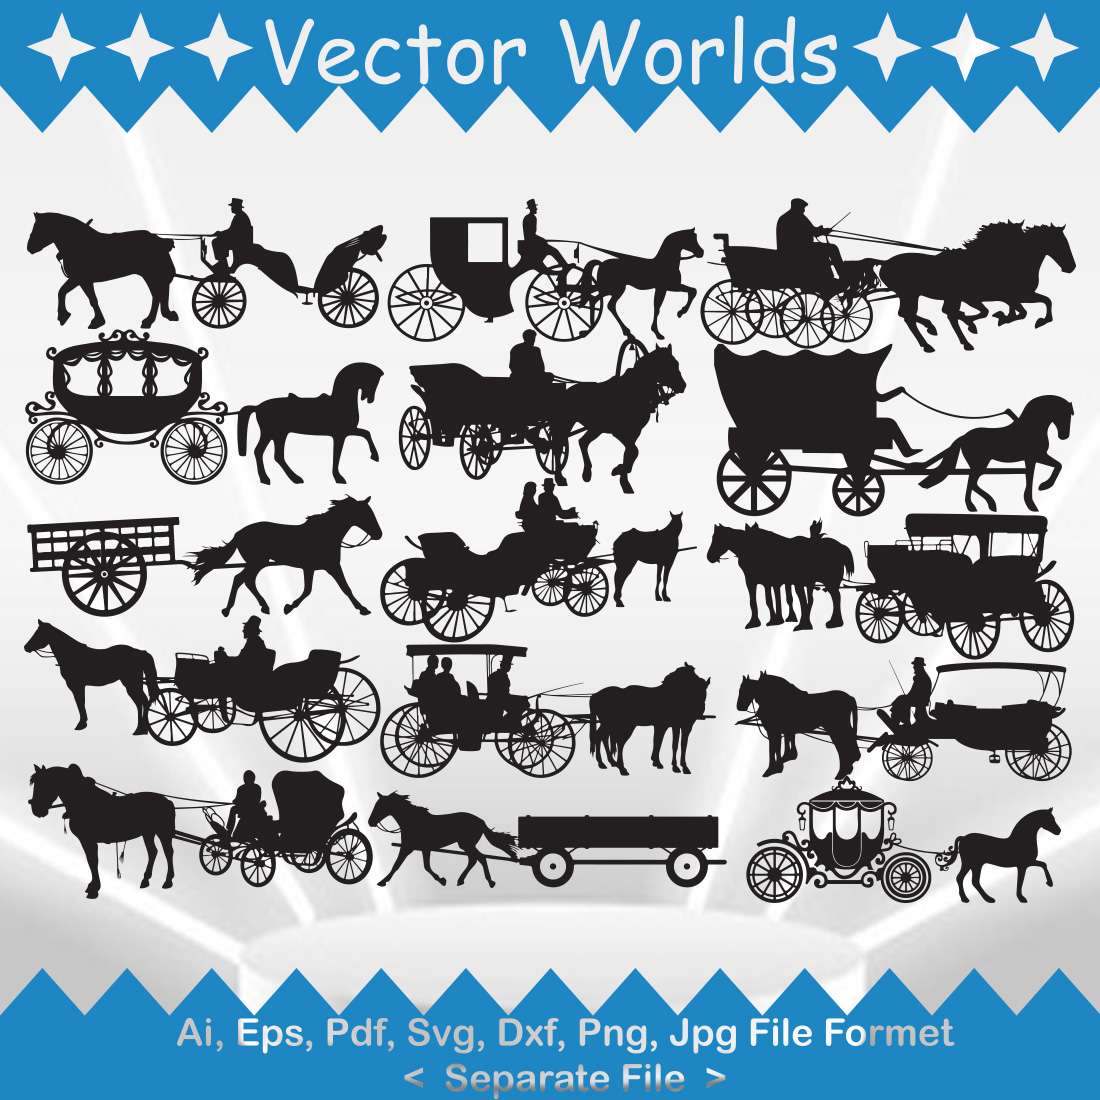 Collection of beautiful vector images of carriages.